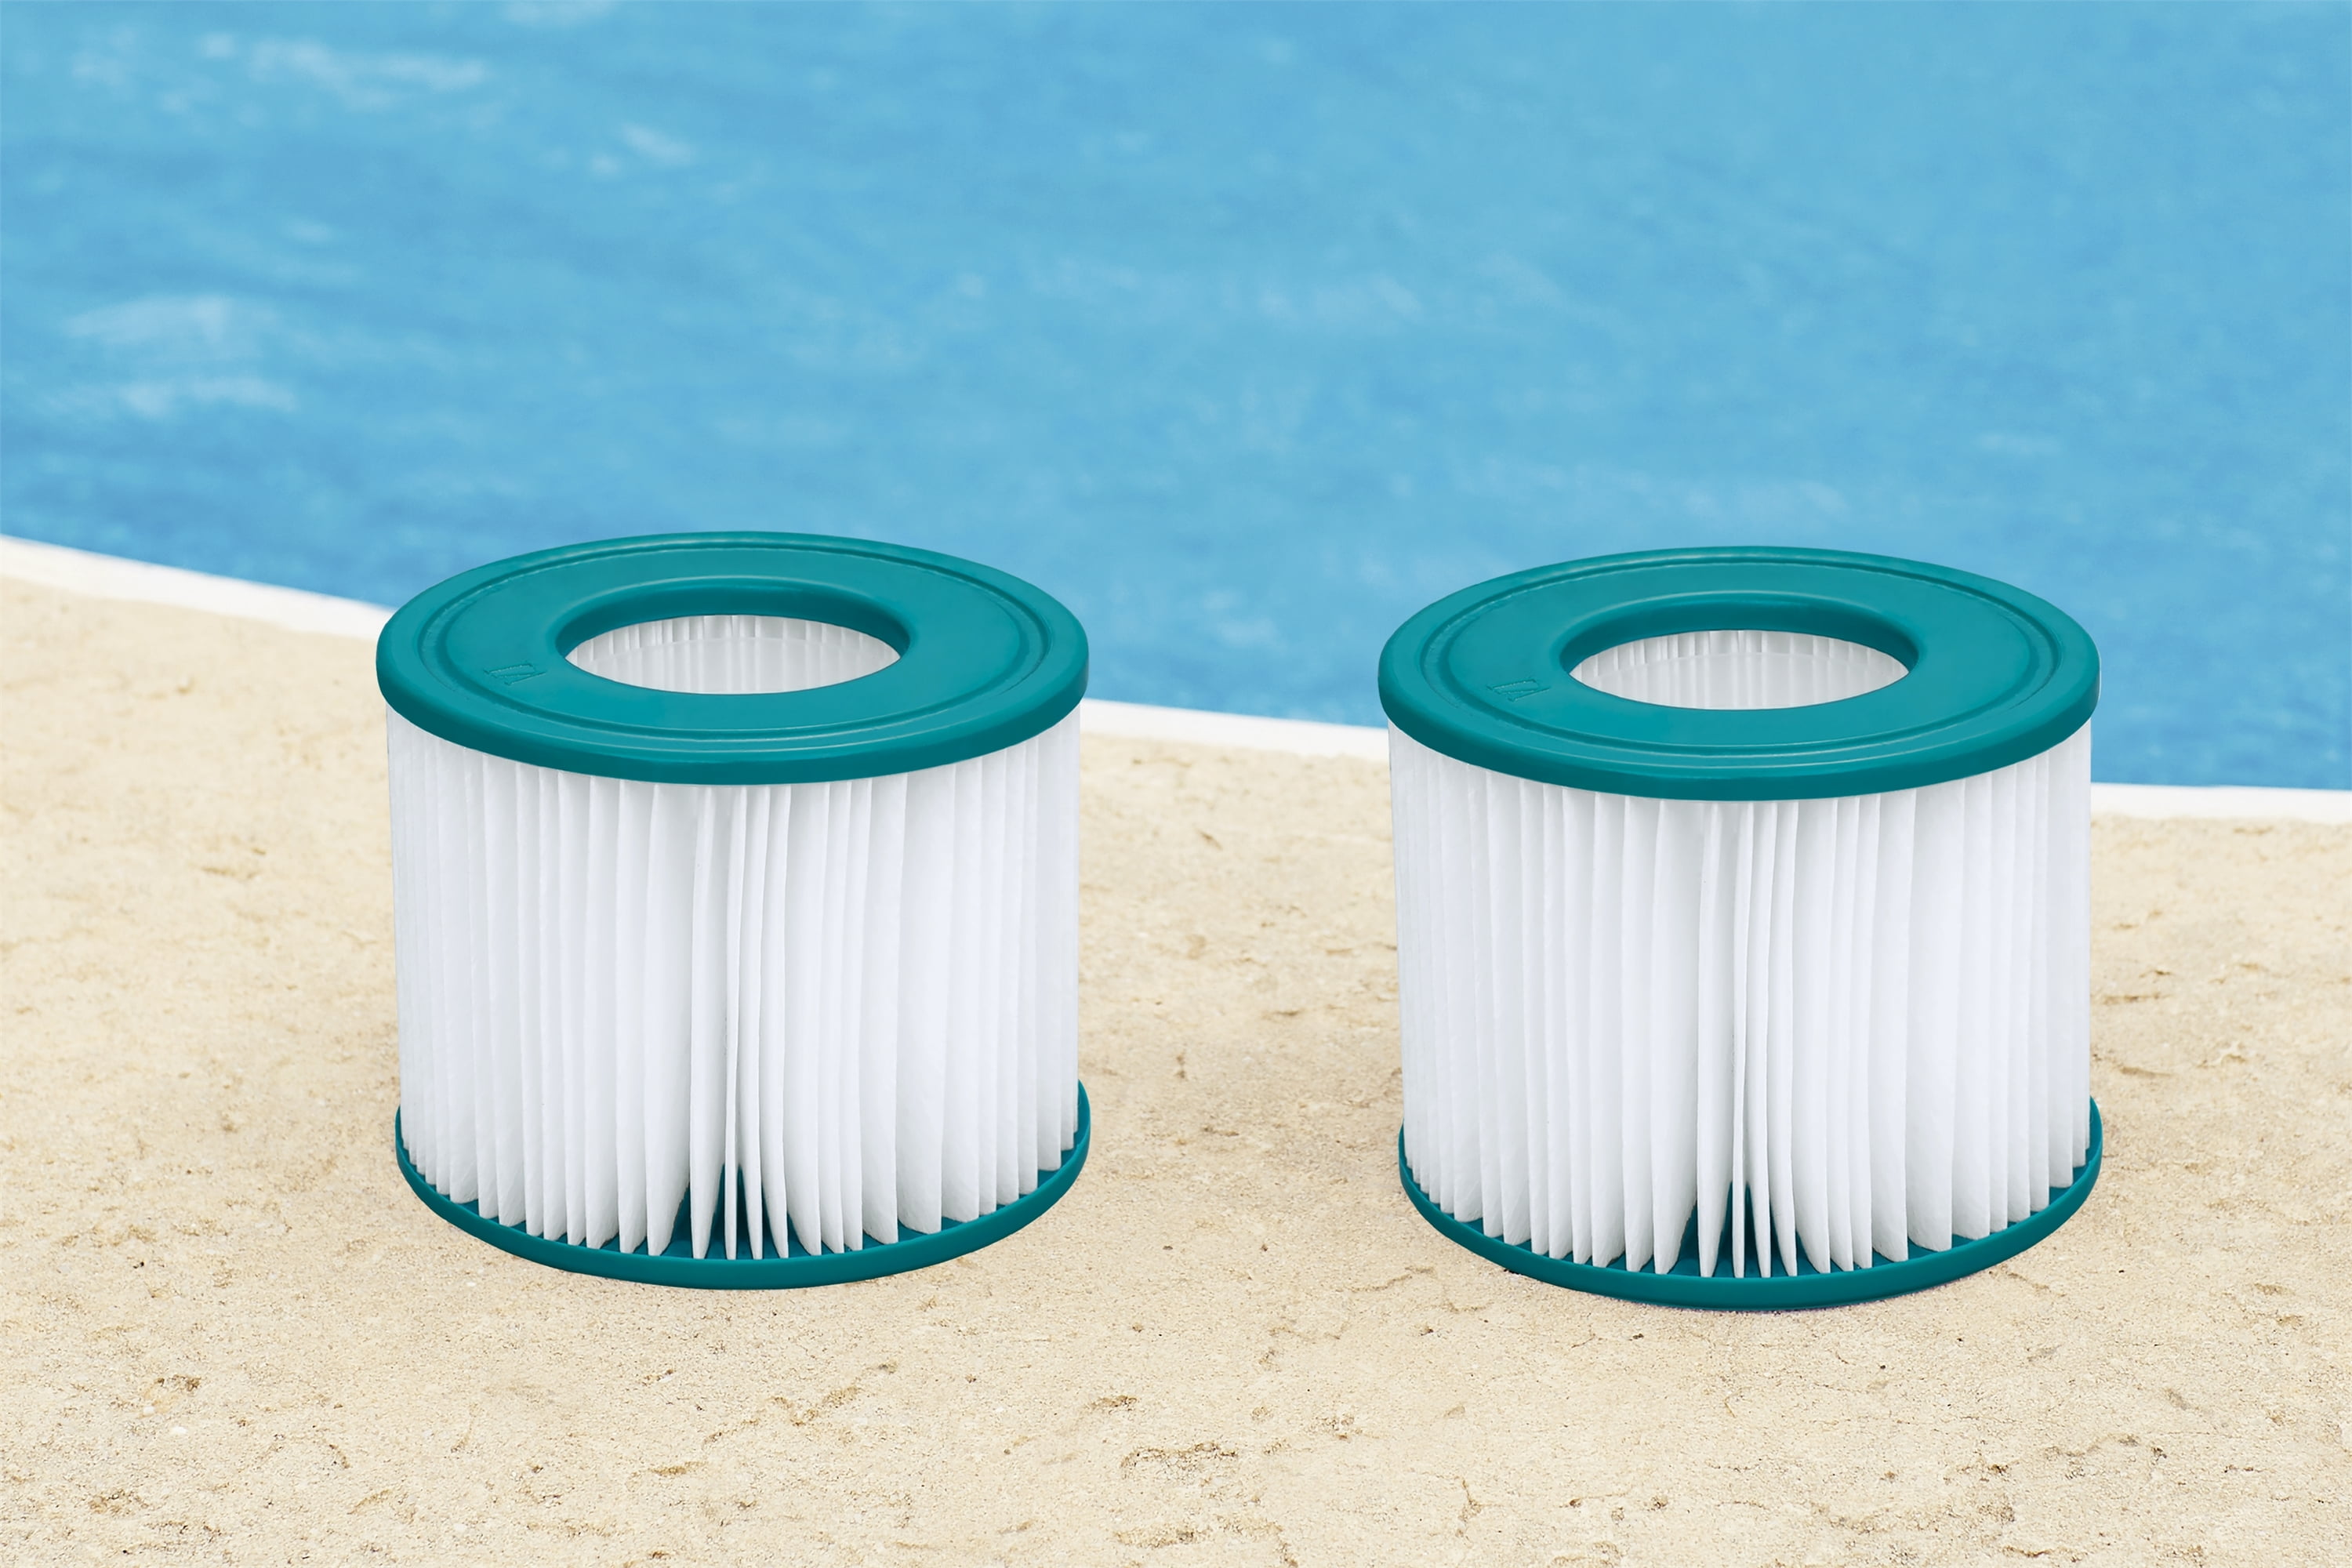 Mainstays Type VI Spa Filter Cartridge for Above-Ground Pool, 2 Pack